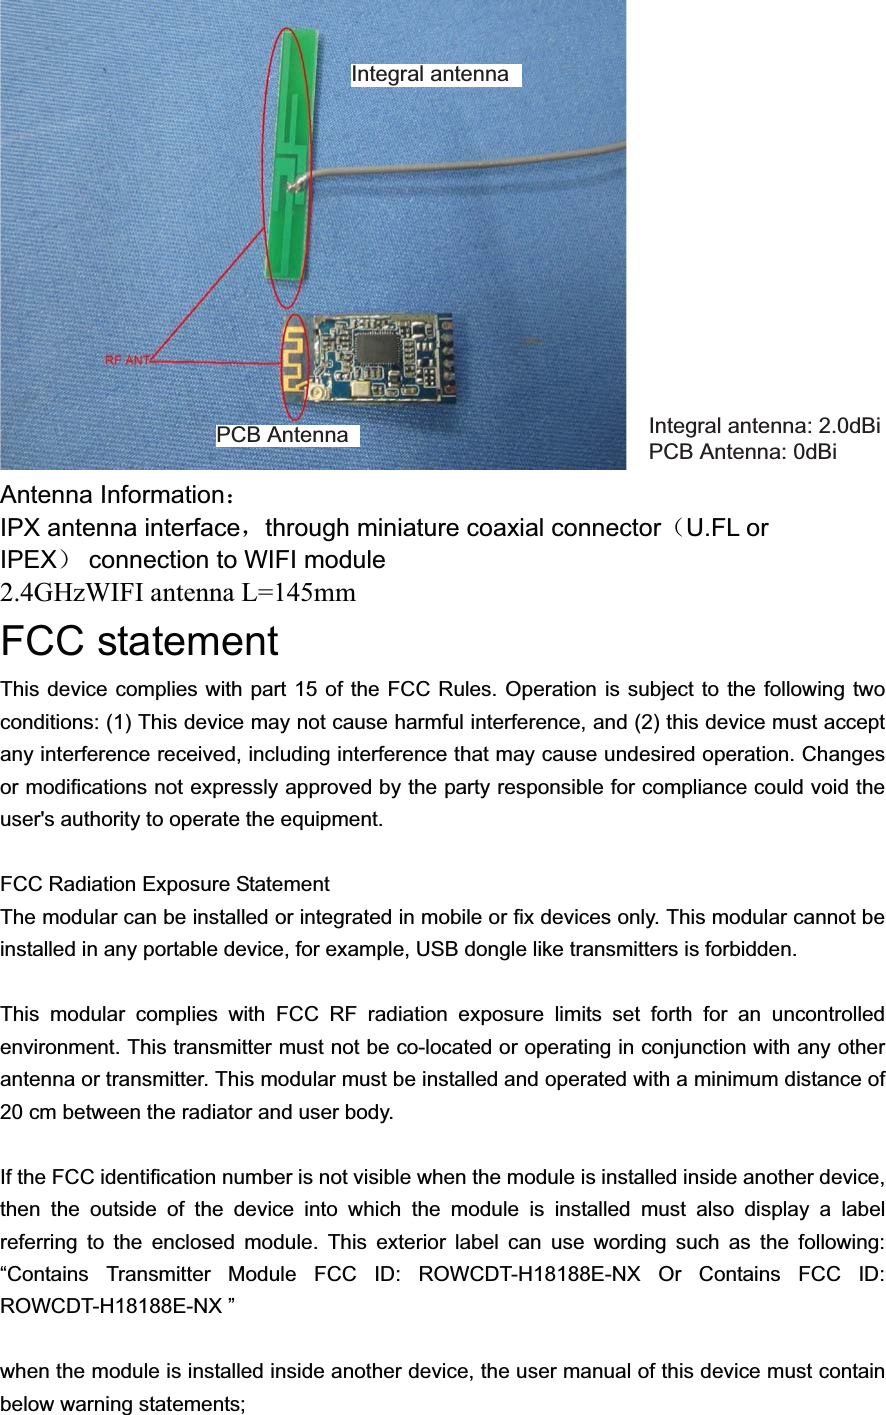 Antenna Information˖IPX antenna interfaceˈthrough miniature coaxial connector˄U.FL or IPEX˅connection to WIFI module2.4GHzWIFI antenna L=145mmFCC statementThis device complies with part 15 of the FCC Rules. Operation is subject to the following two conditions: (1) This device may not cause harmful interference, and (2) this device must accept any interference received, including interference that may cause undesired operation. Changes or modifications not expressly approved by the party responsible for compliance could void the user&apos;s authority to operate the equipment.FCC Radiation Exposure StatementThe modular can be installed or integrated in mobile or fix devices only. This modular cannot beinstalled in any portable device, for example, USB dongle like transmitters is forbidden.   This modular complies with FCC RF radiation exposure limits set forth for an uncontrolled environment. This transmitter must not be co-located or operating in conjunction with any other antenna or transmitter. This modular must be installed and operated with a minimum distance of 20 cm between the radiator and user body.If the FCC identification number is not visible when the module is installed inside another device, then the outside of the device into which the module is installed must also display a label referring to the enclosed module. This exterior label can use wording such as the following: “Contains Transmitter Module FCC ID: ROWCDT-H18188E-NX Or Contains FCC ID: ROWCDT-H18188E-NX ”   when the module is installed inside another device, the user manual of this device must contain below warning statements;   Integral antenna: 2.0dBi   PCB Antenna: 0dBi  Integral antennaPCB AntennaThis product has integral antenna and alternative PCB antenna to use . But it isn&apos;t a MIMO equipment. Both of the antenna was used independent. When the customer need a PCB antenna, and the integral antenna will be take out, vise versa.